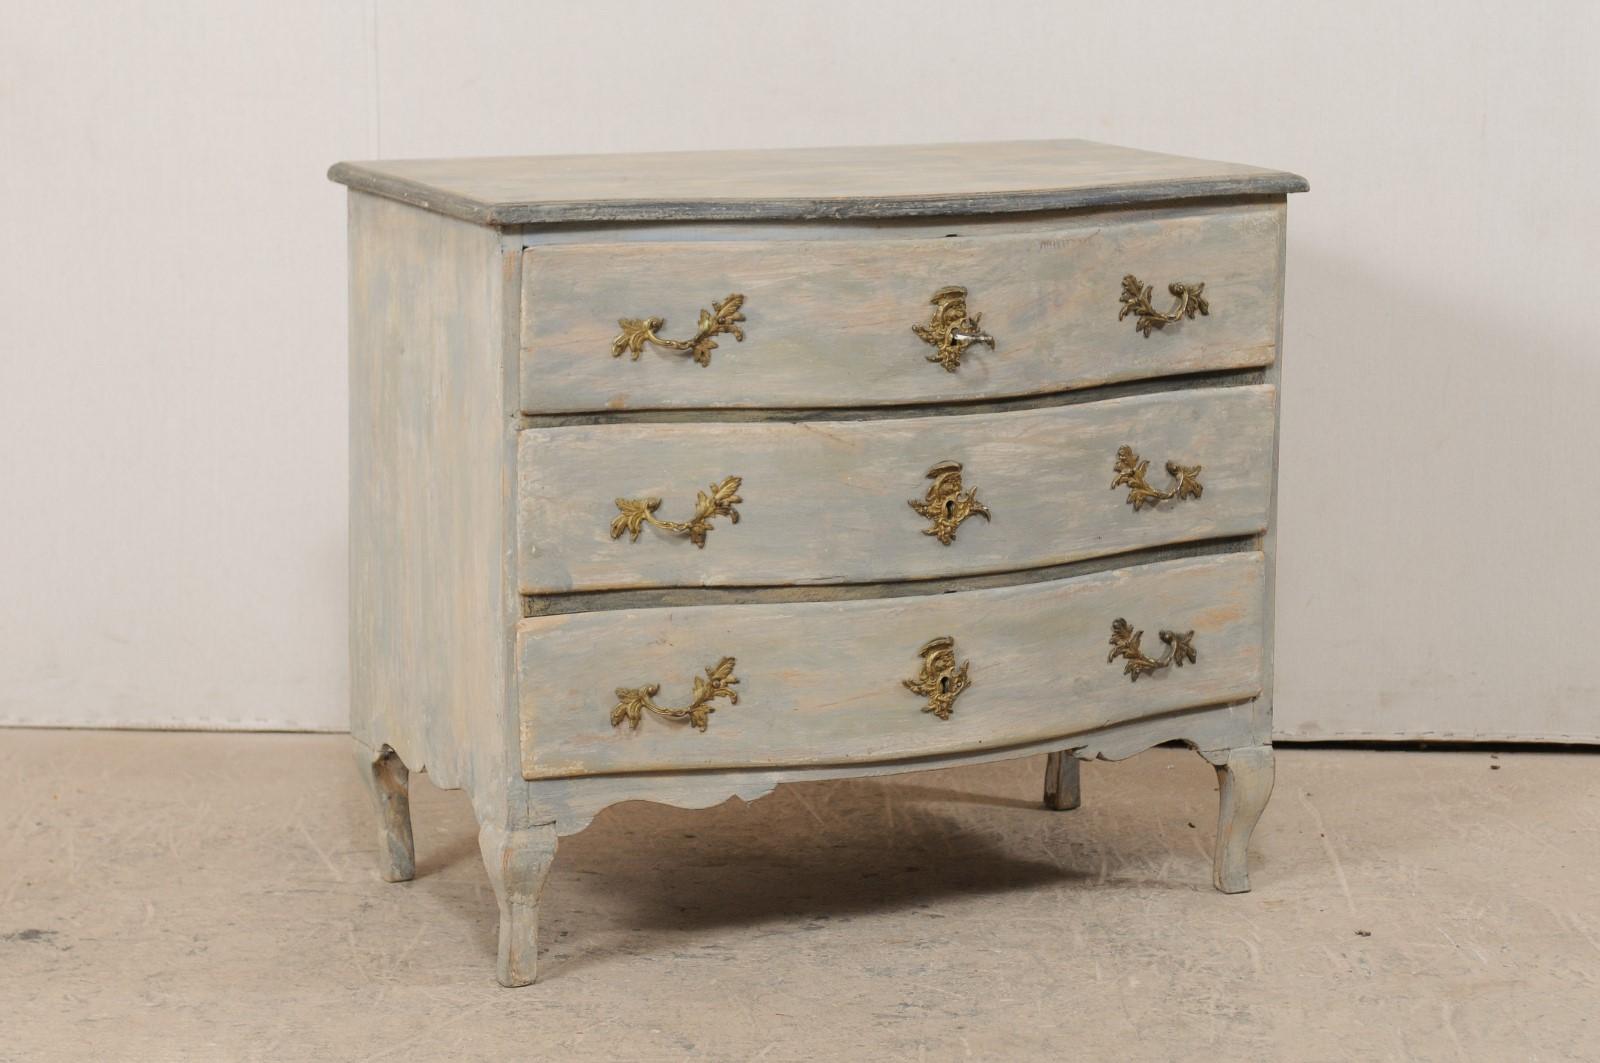 An 18th century Swedish period Rococo chest of three drawers. This antique Rococo chest from Sweden features a delicate serpentine body, accolade carved side skirts, nicely carved trim at either side of front skirt, and is presented upon petite